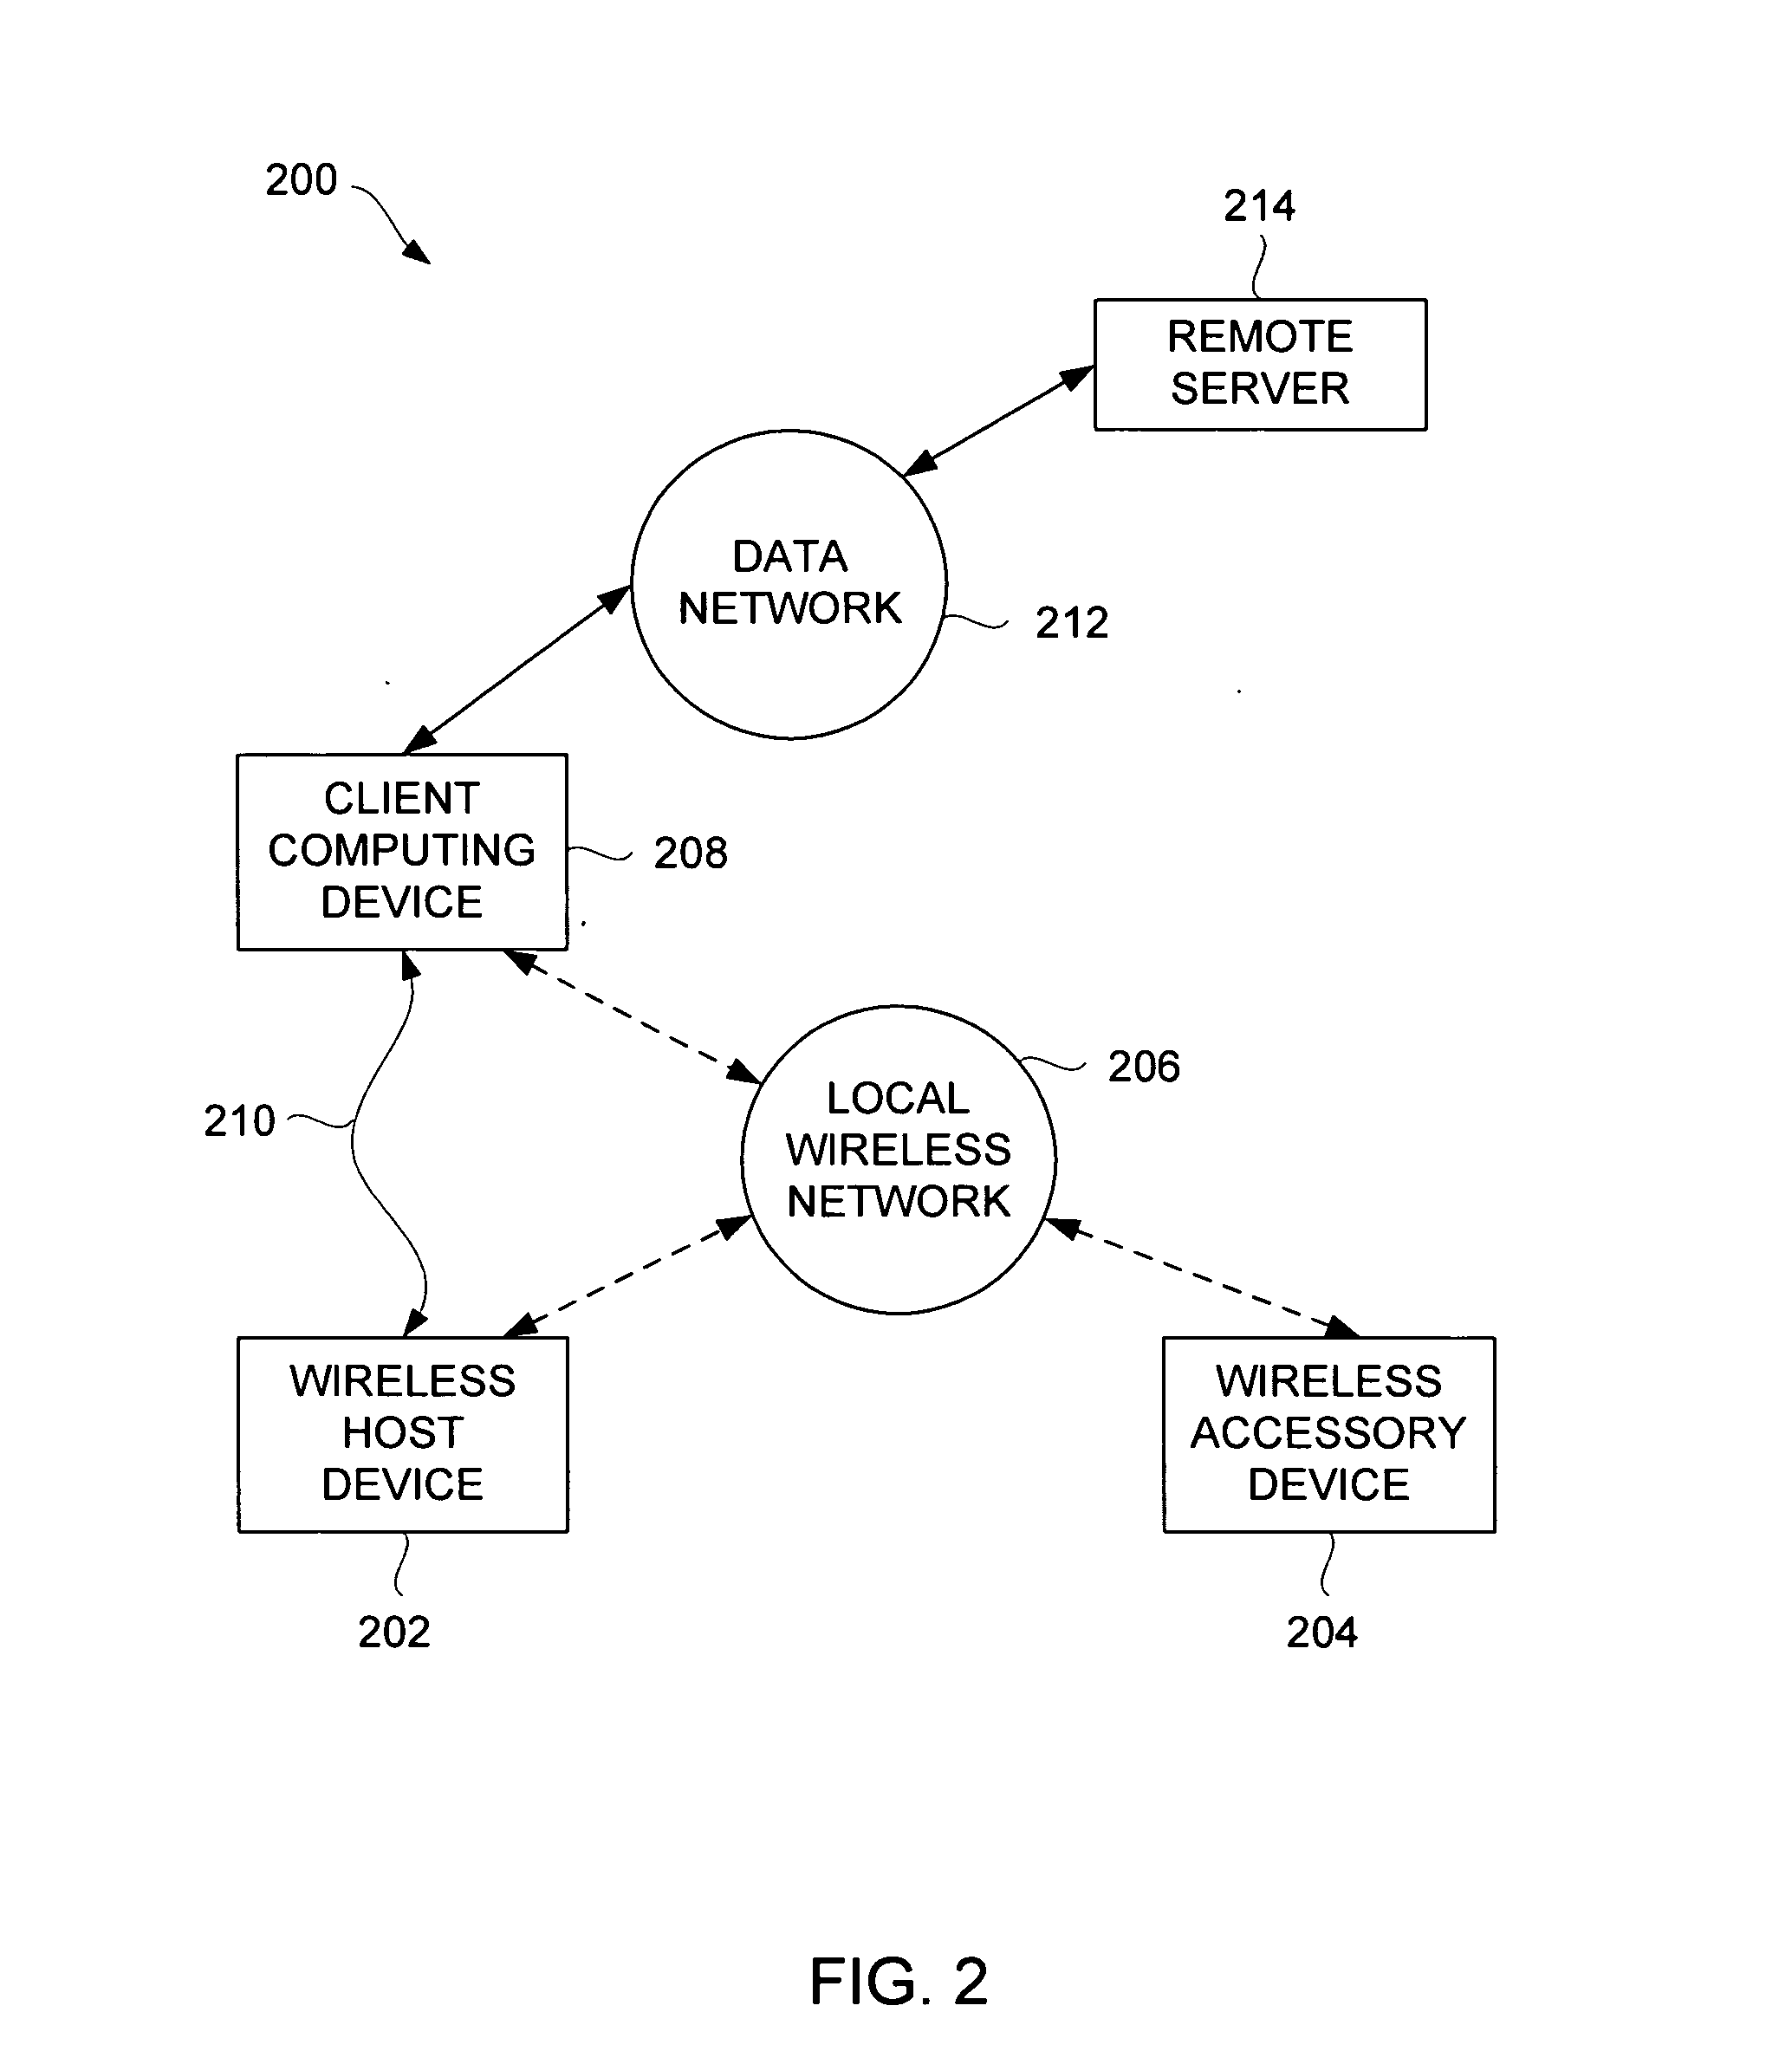 Automated pairing of wireless accessories with host devices